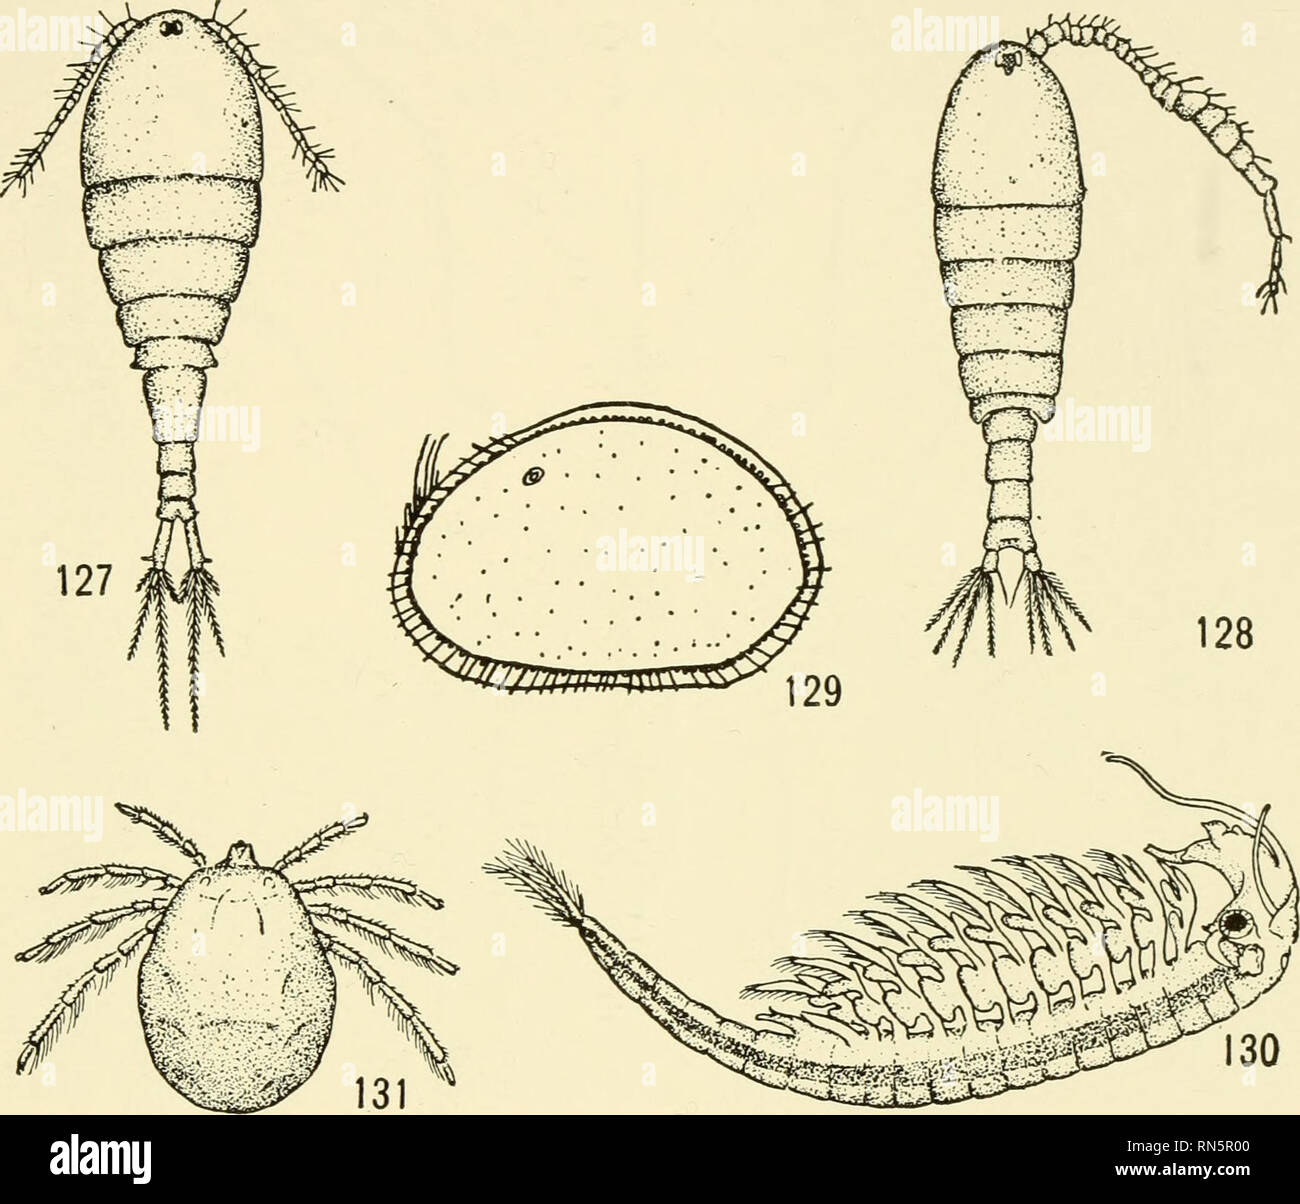 . Animal communities in temperate America : as illustrated in the Chicago region; a study in animal ecology. Animal ecology; Zoology -- Illinois Chicago. TEMPORARY POND COMMUNITIES 177 the ostracod (Cyprois marglnata X147) (Fig. 129), and the fairy shrimp (Eubranchipus) (148) (Fig. 130), all of which are characteristic of tempo- rary ponds. Red mites (Fig. 131) are also common (149). Professor Child (unpublished) has noted that the distribution each spring of Eubranchipus and of other temporary pond species is modified. Temporary Grassy Pond Animals Fig. 127.—A temporary pond copepod {Cyclops  Stock Photo